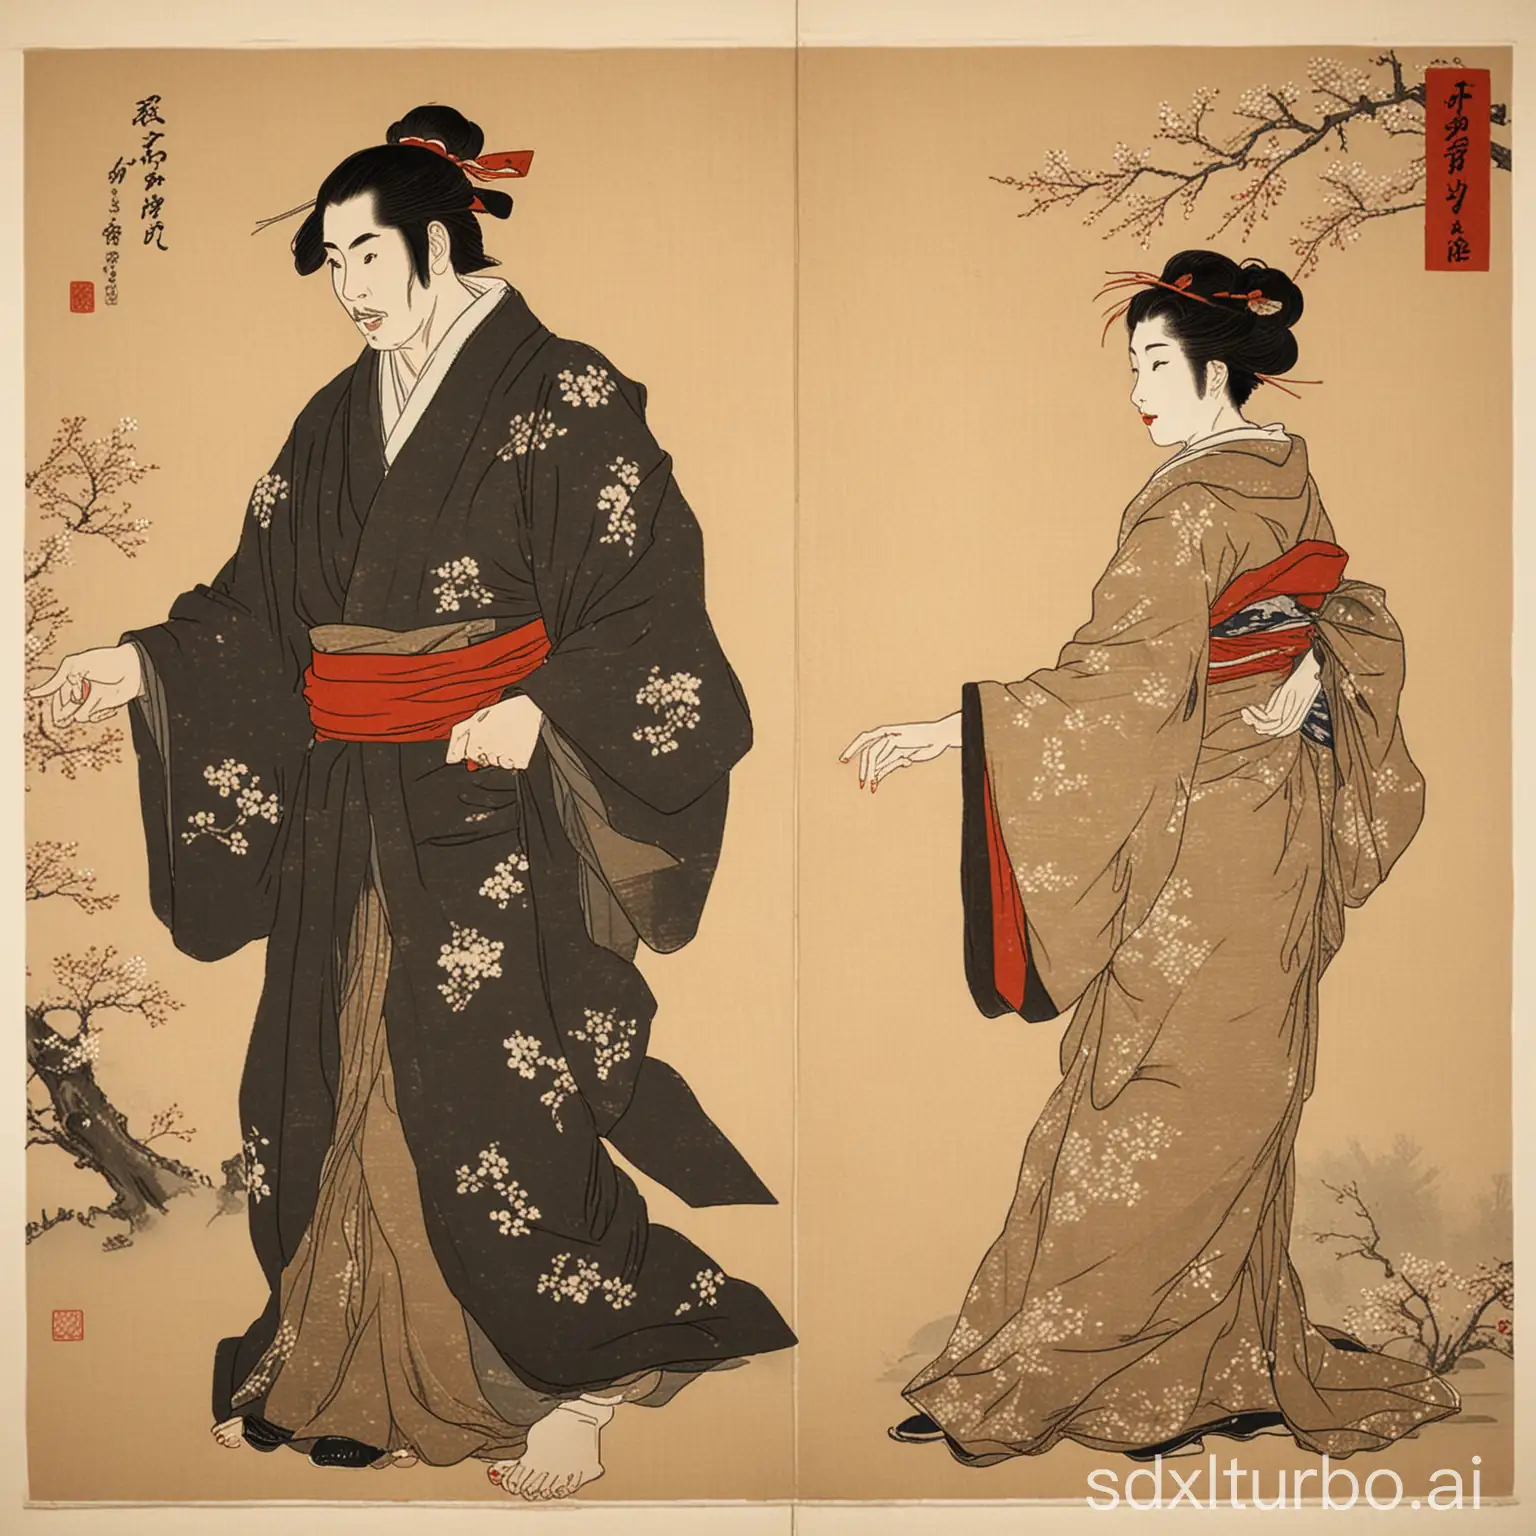 A man and a woman, one of each. The man is calling to the woman, who turns around. Captured at the moment she turns back. The style is ukiyo-e.